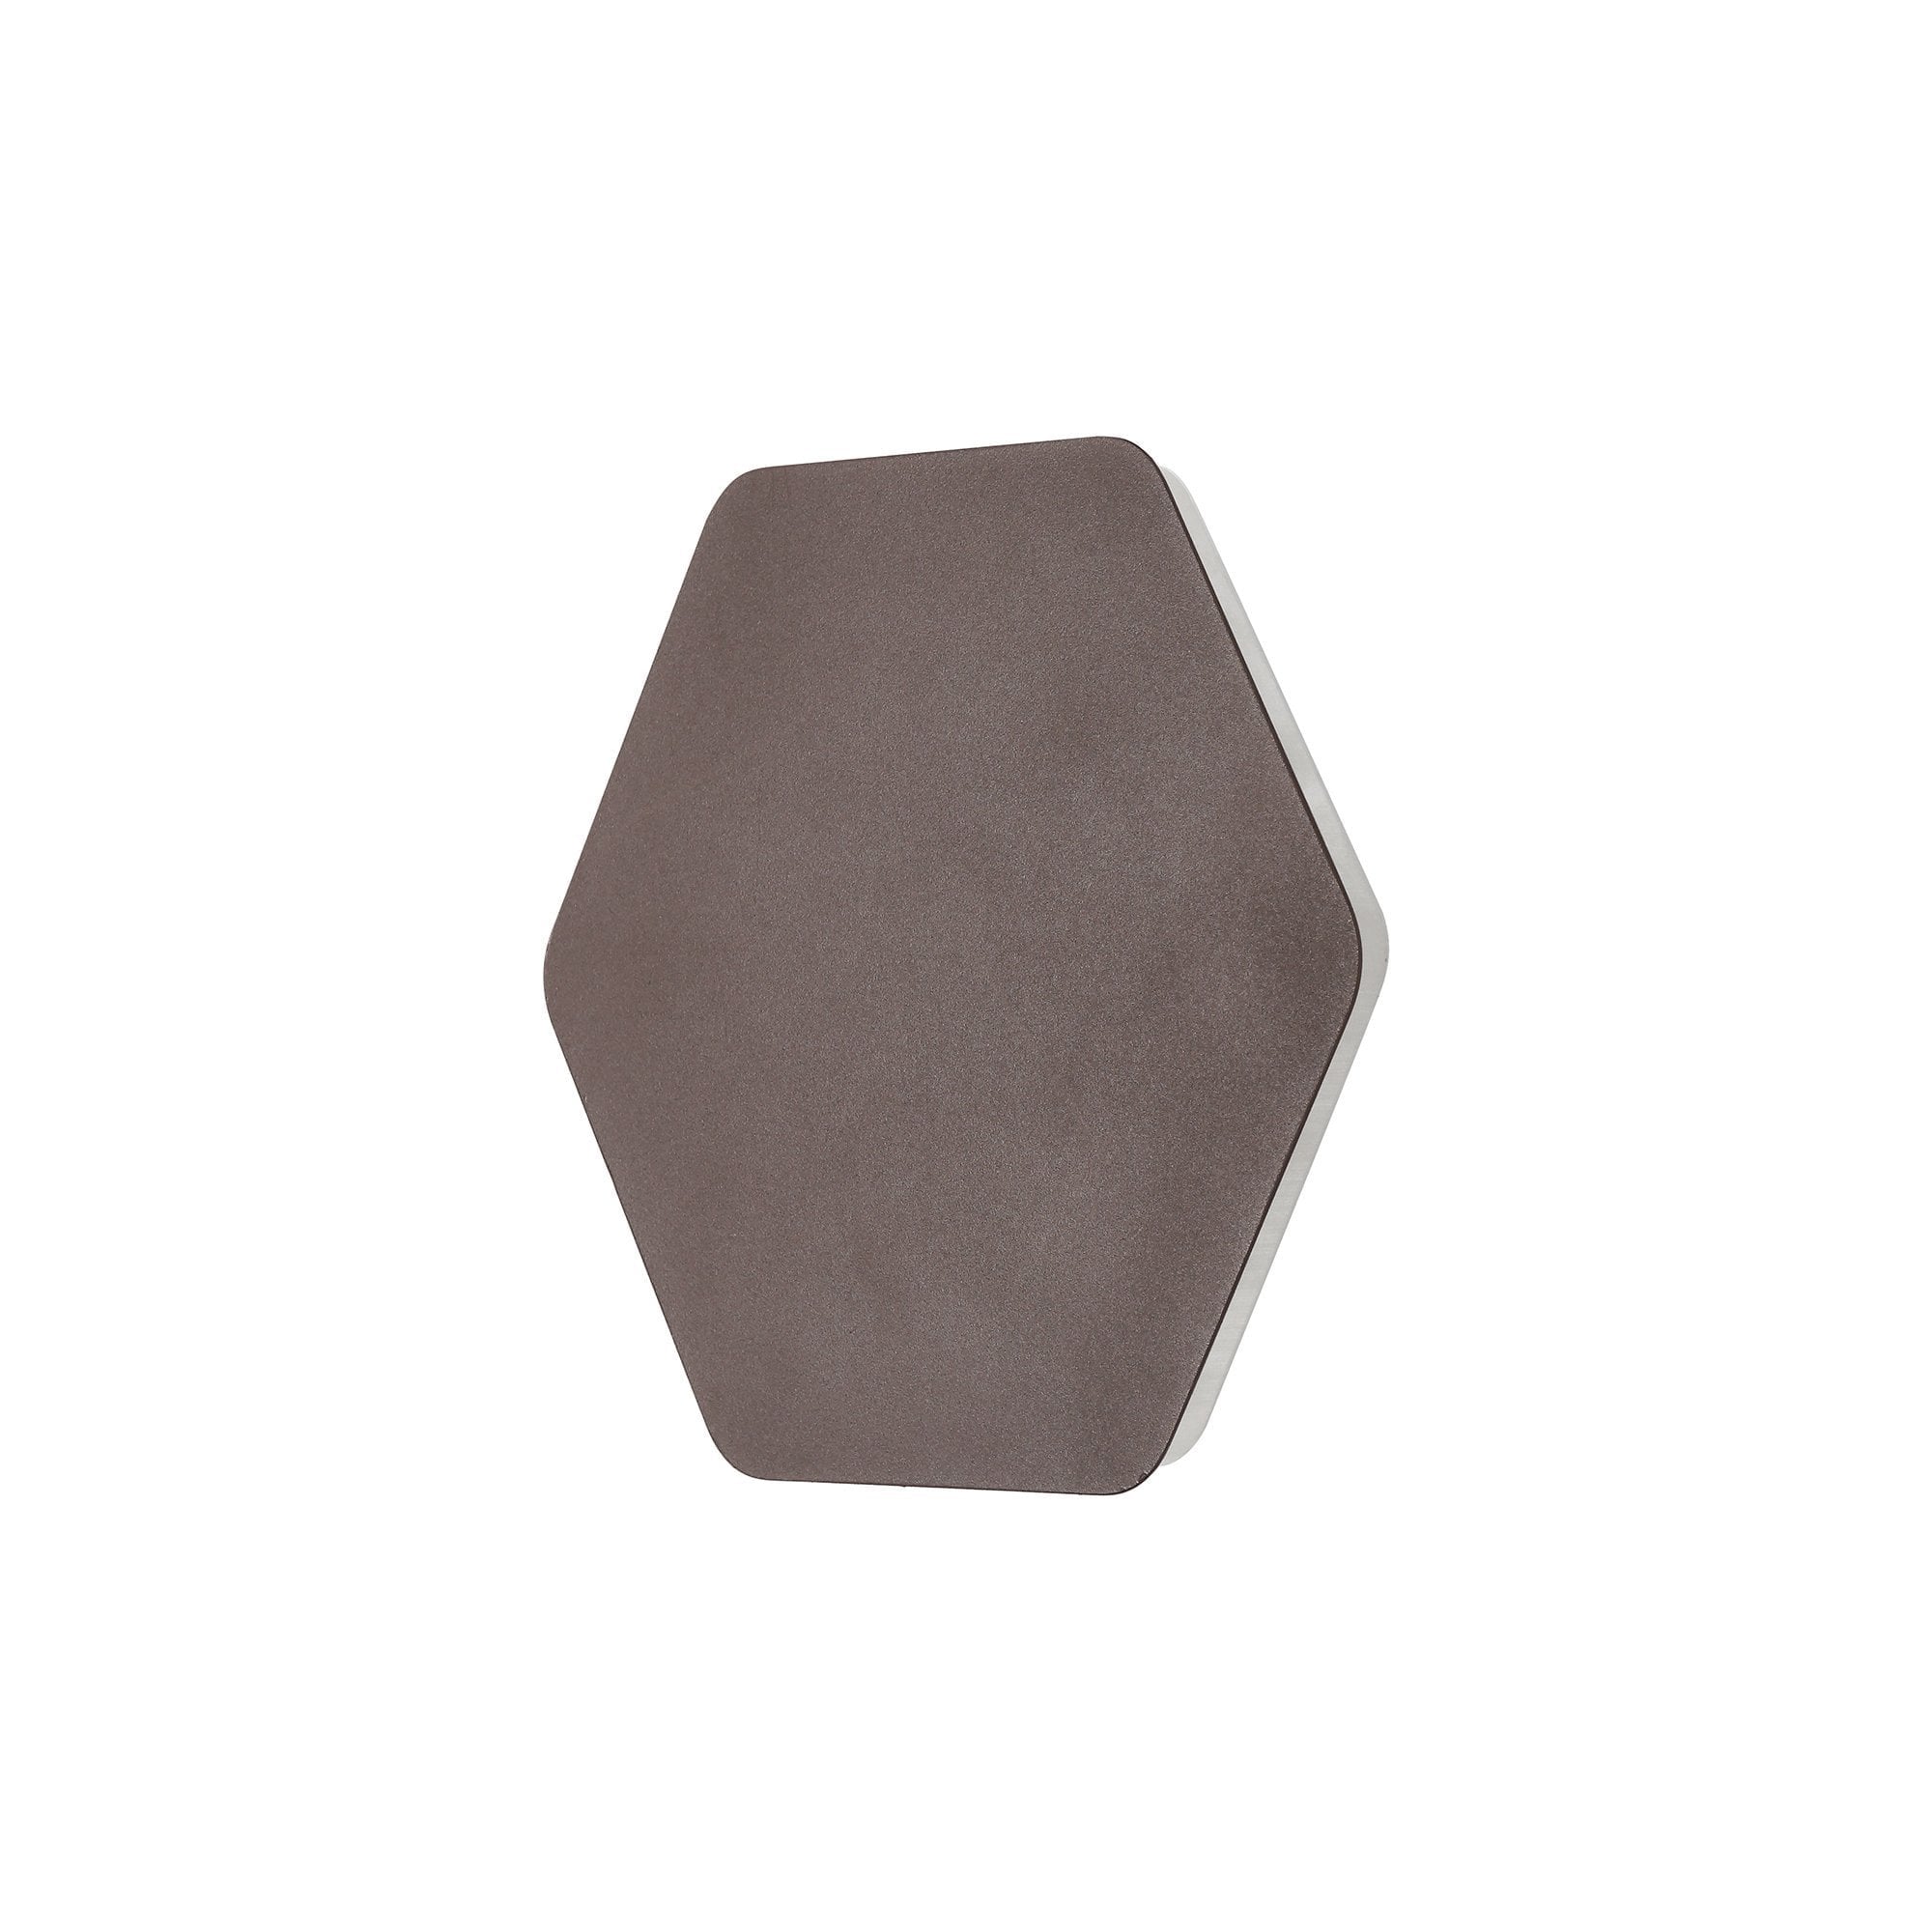 Magnetic Base Wall Lamp, 12W LED 3000K 498lm, 20/19cm Horizontal Hexagonal Centre, Coffee/Acrylic Frosted Diffuser